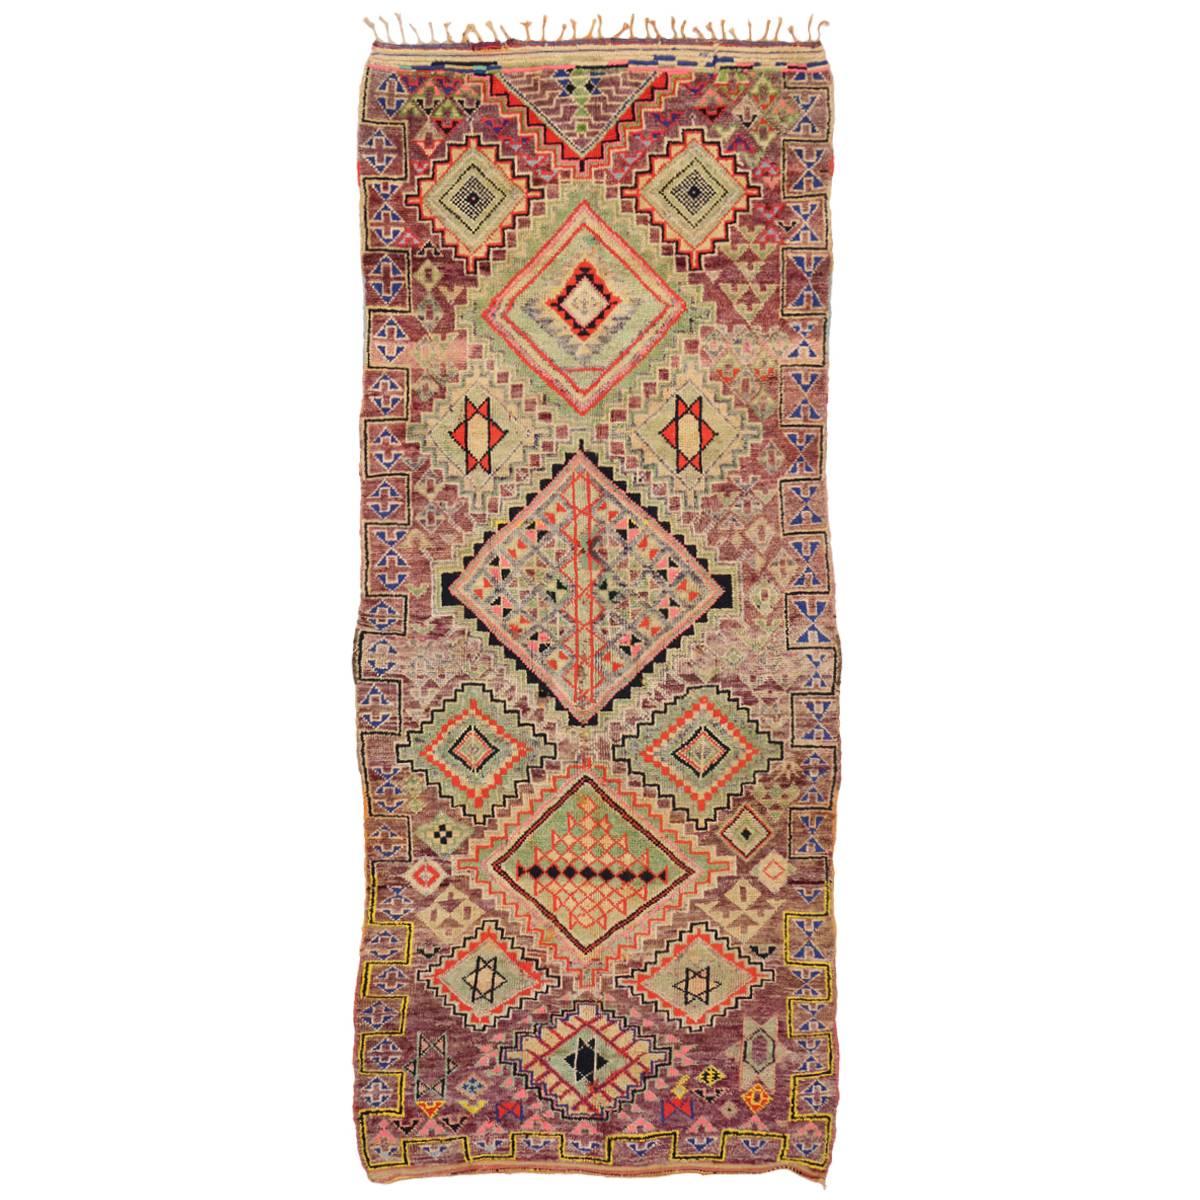 Vintage Berber Moroccan Rug with Modern Tribal Style and Judaic Influence